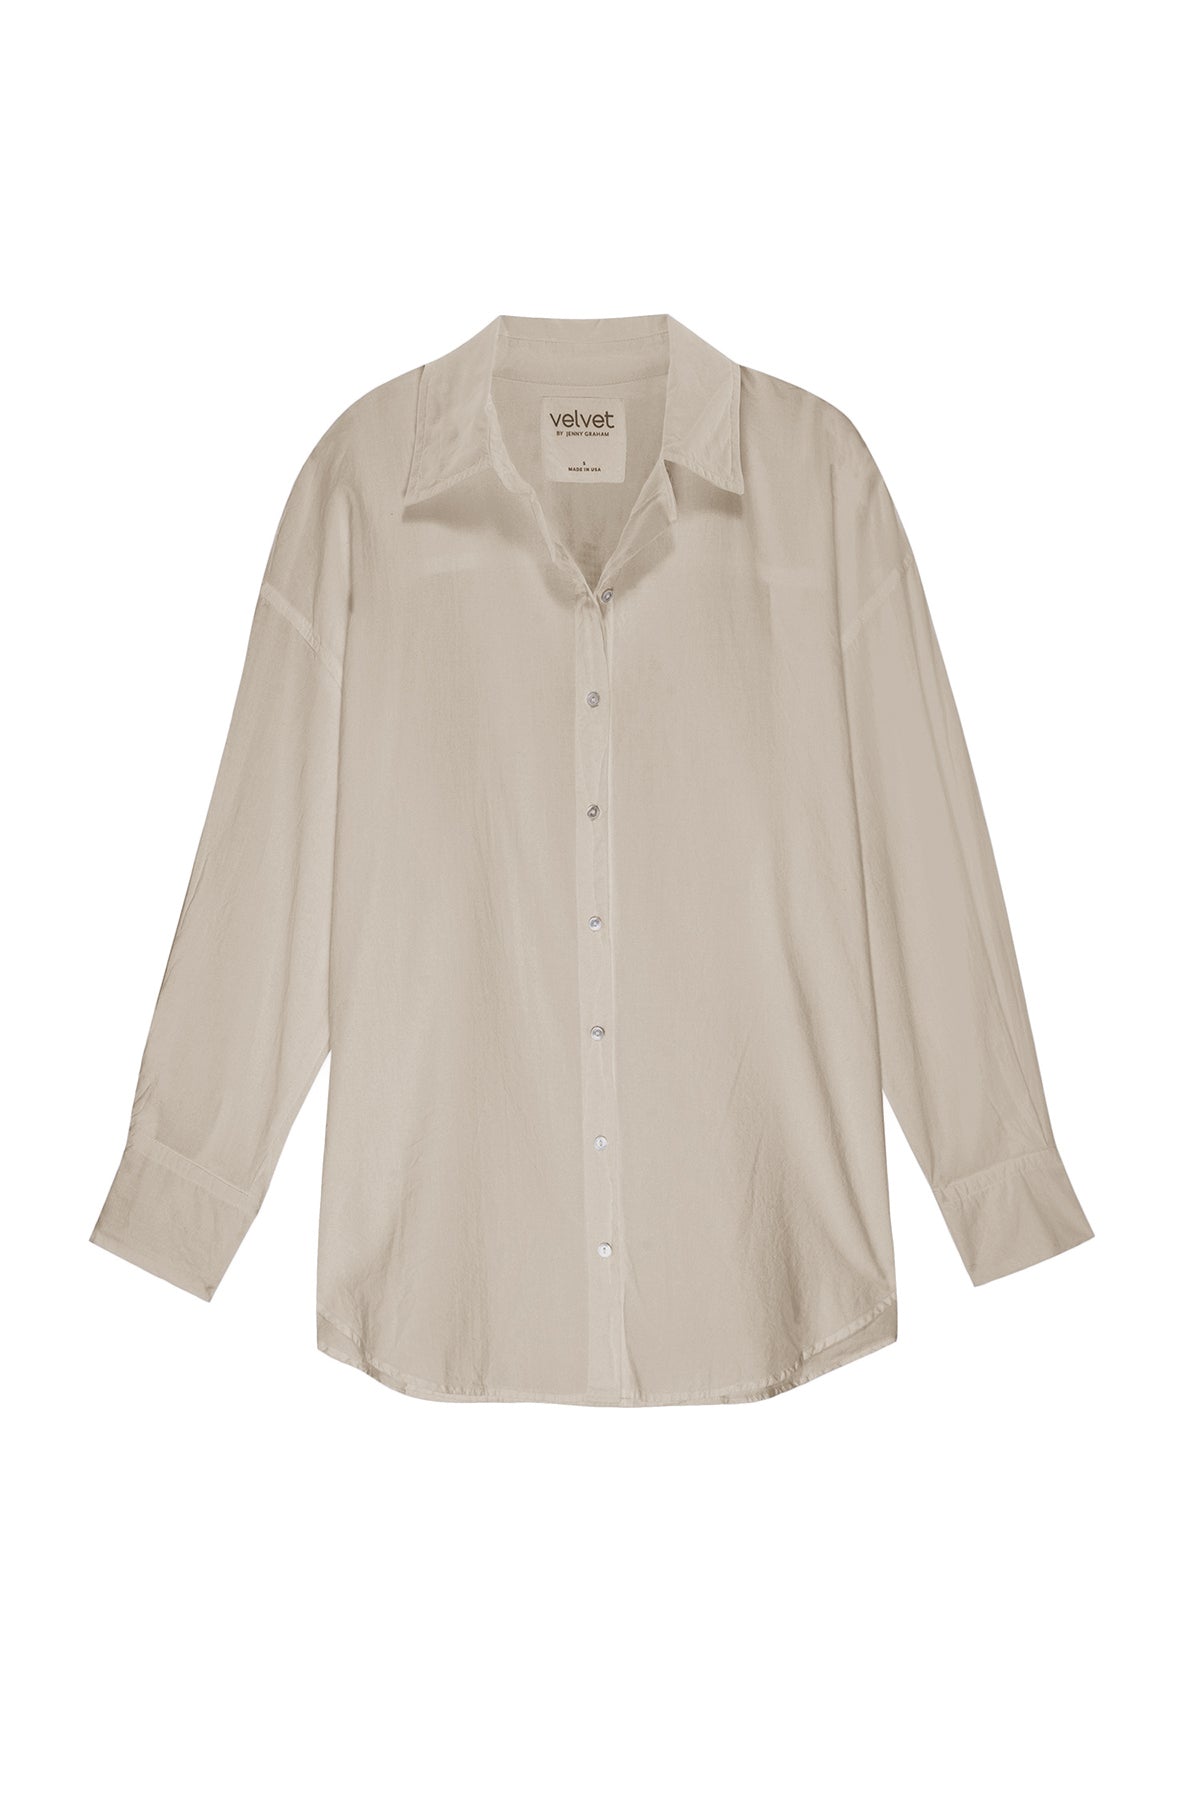 a Velvet by Jenny Graham REDONDO BUTTON-UP SHIRT in beige.-24508394242241